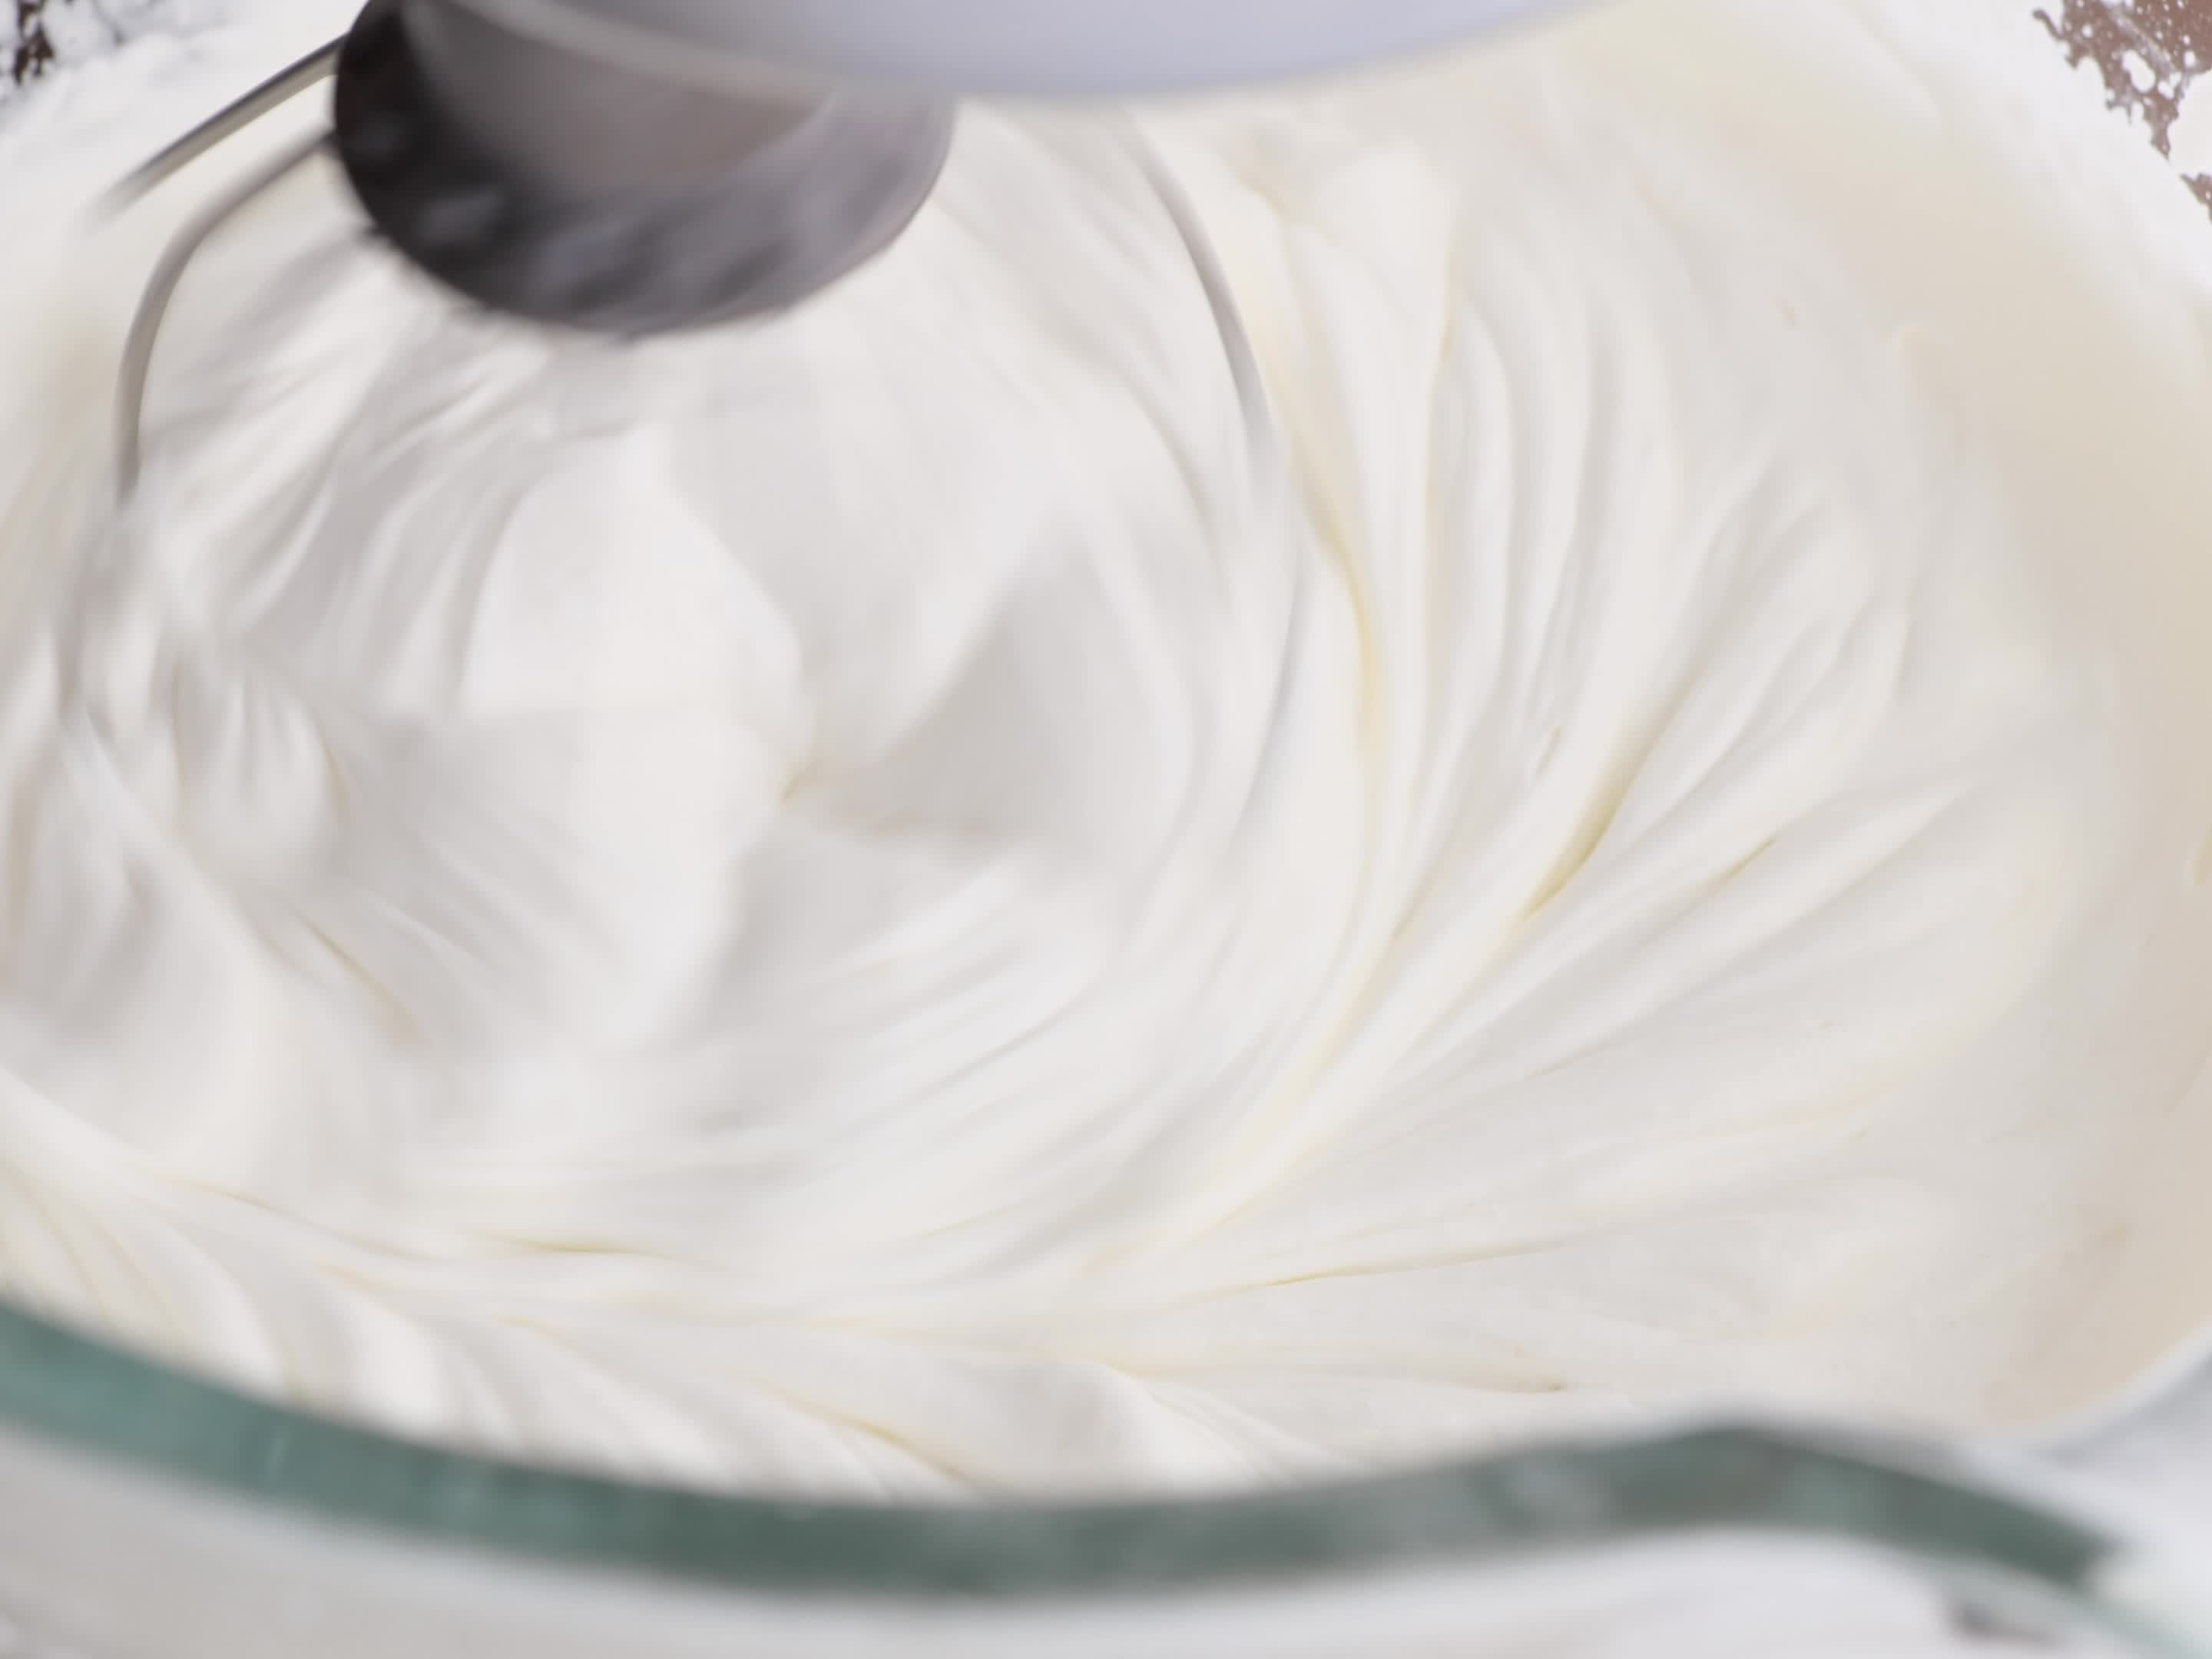 How to Get Whipped Cream Without Heavy Cream - The Kitchen Community